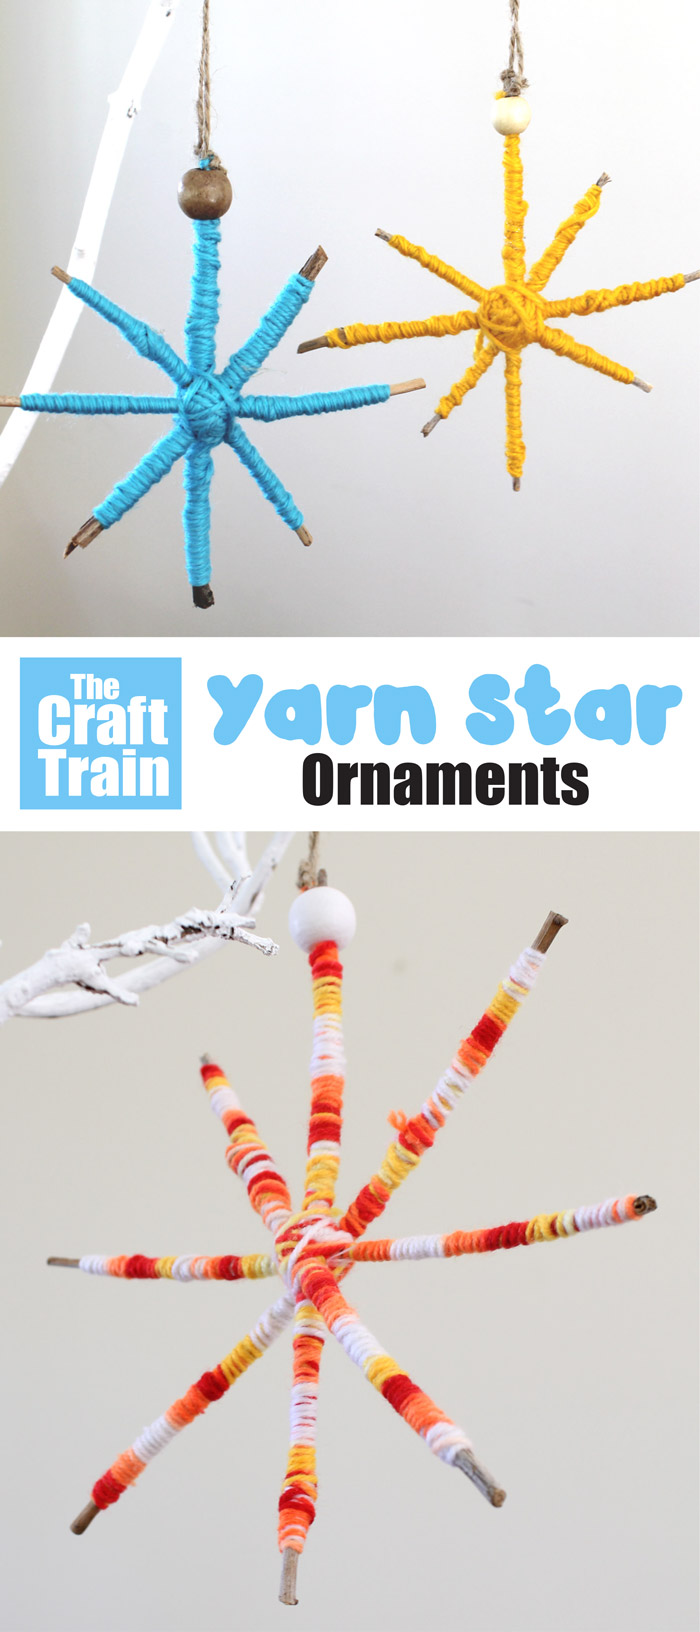 Yarn star ornaments made from garden twigs wrapped in yarn – souch a simple and eco-friendly Christmas craft for kids #yarn #Christmas #kidscrafts